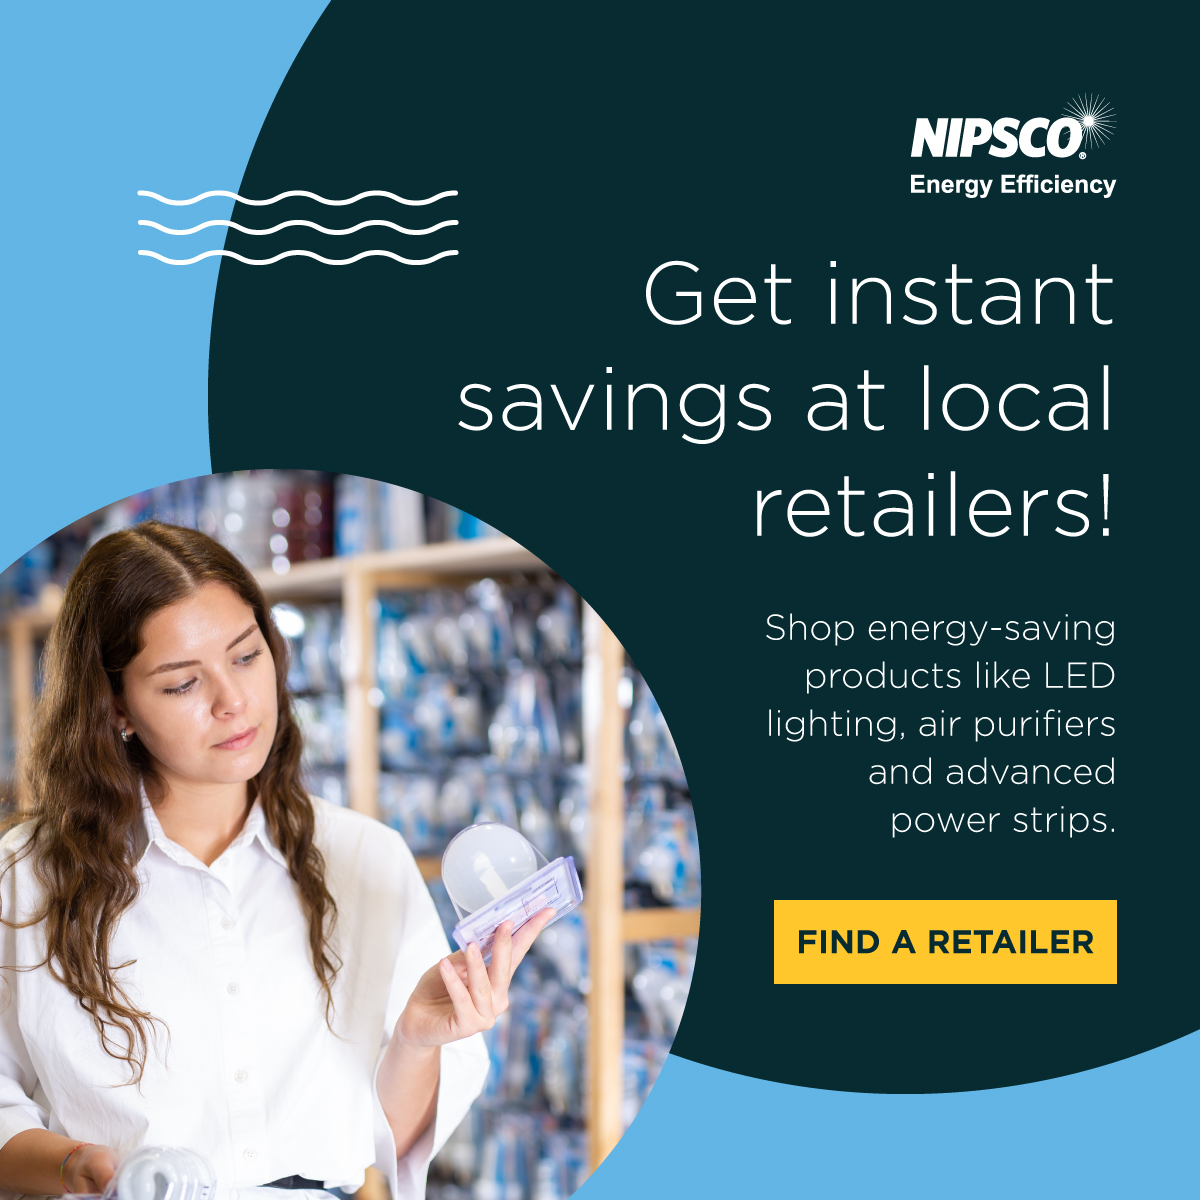 nipsco-on-twitter-did-you-know-that-eligible-nipsco-customers-can